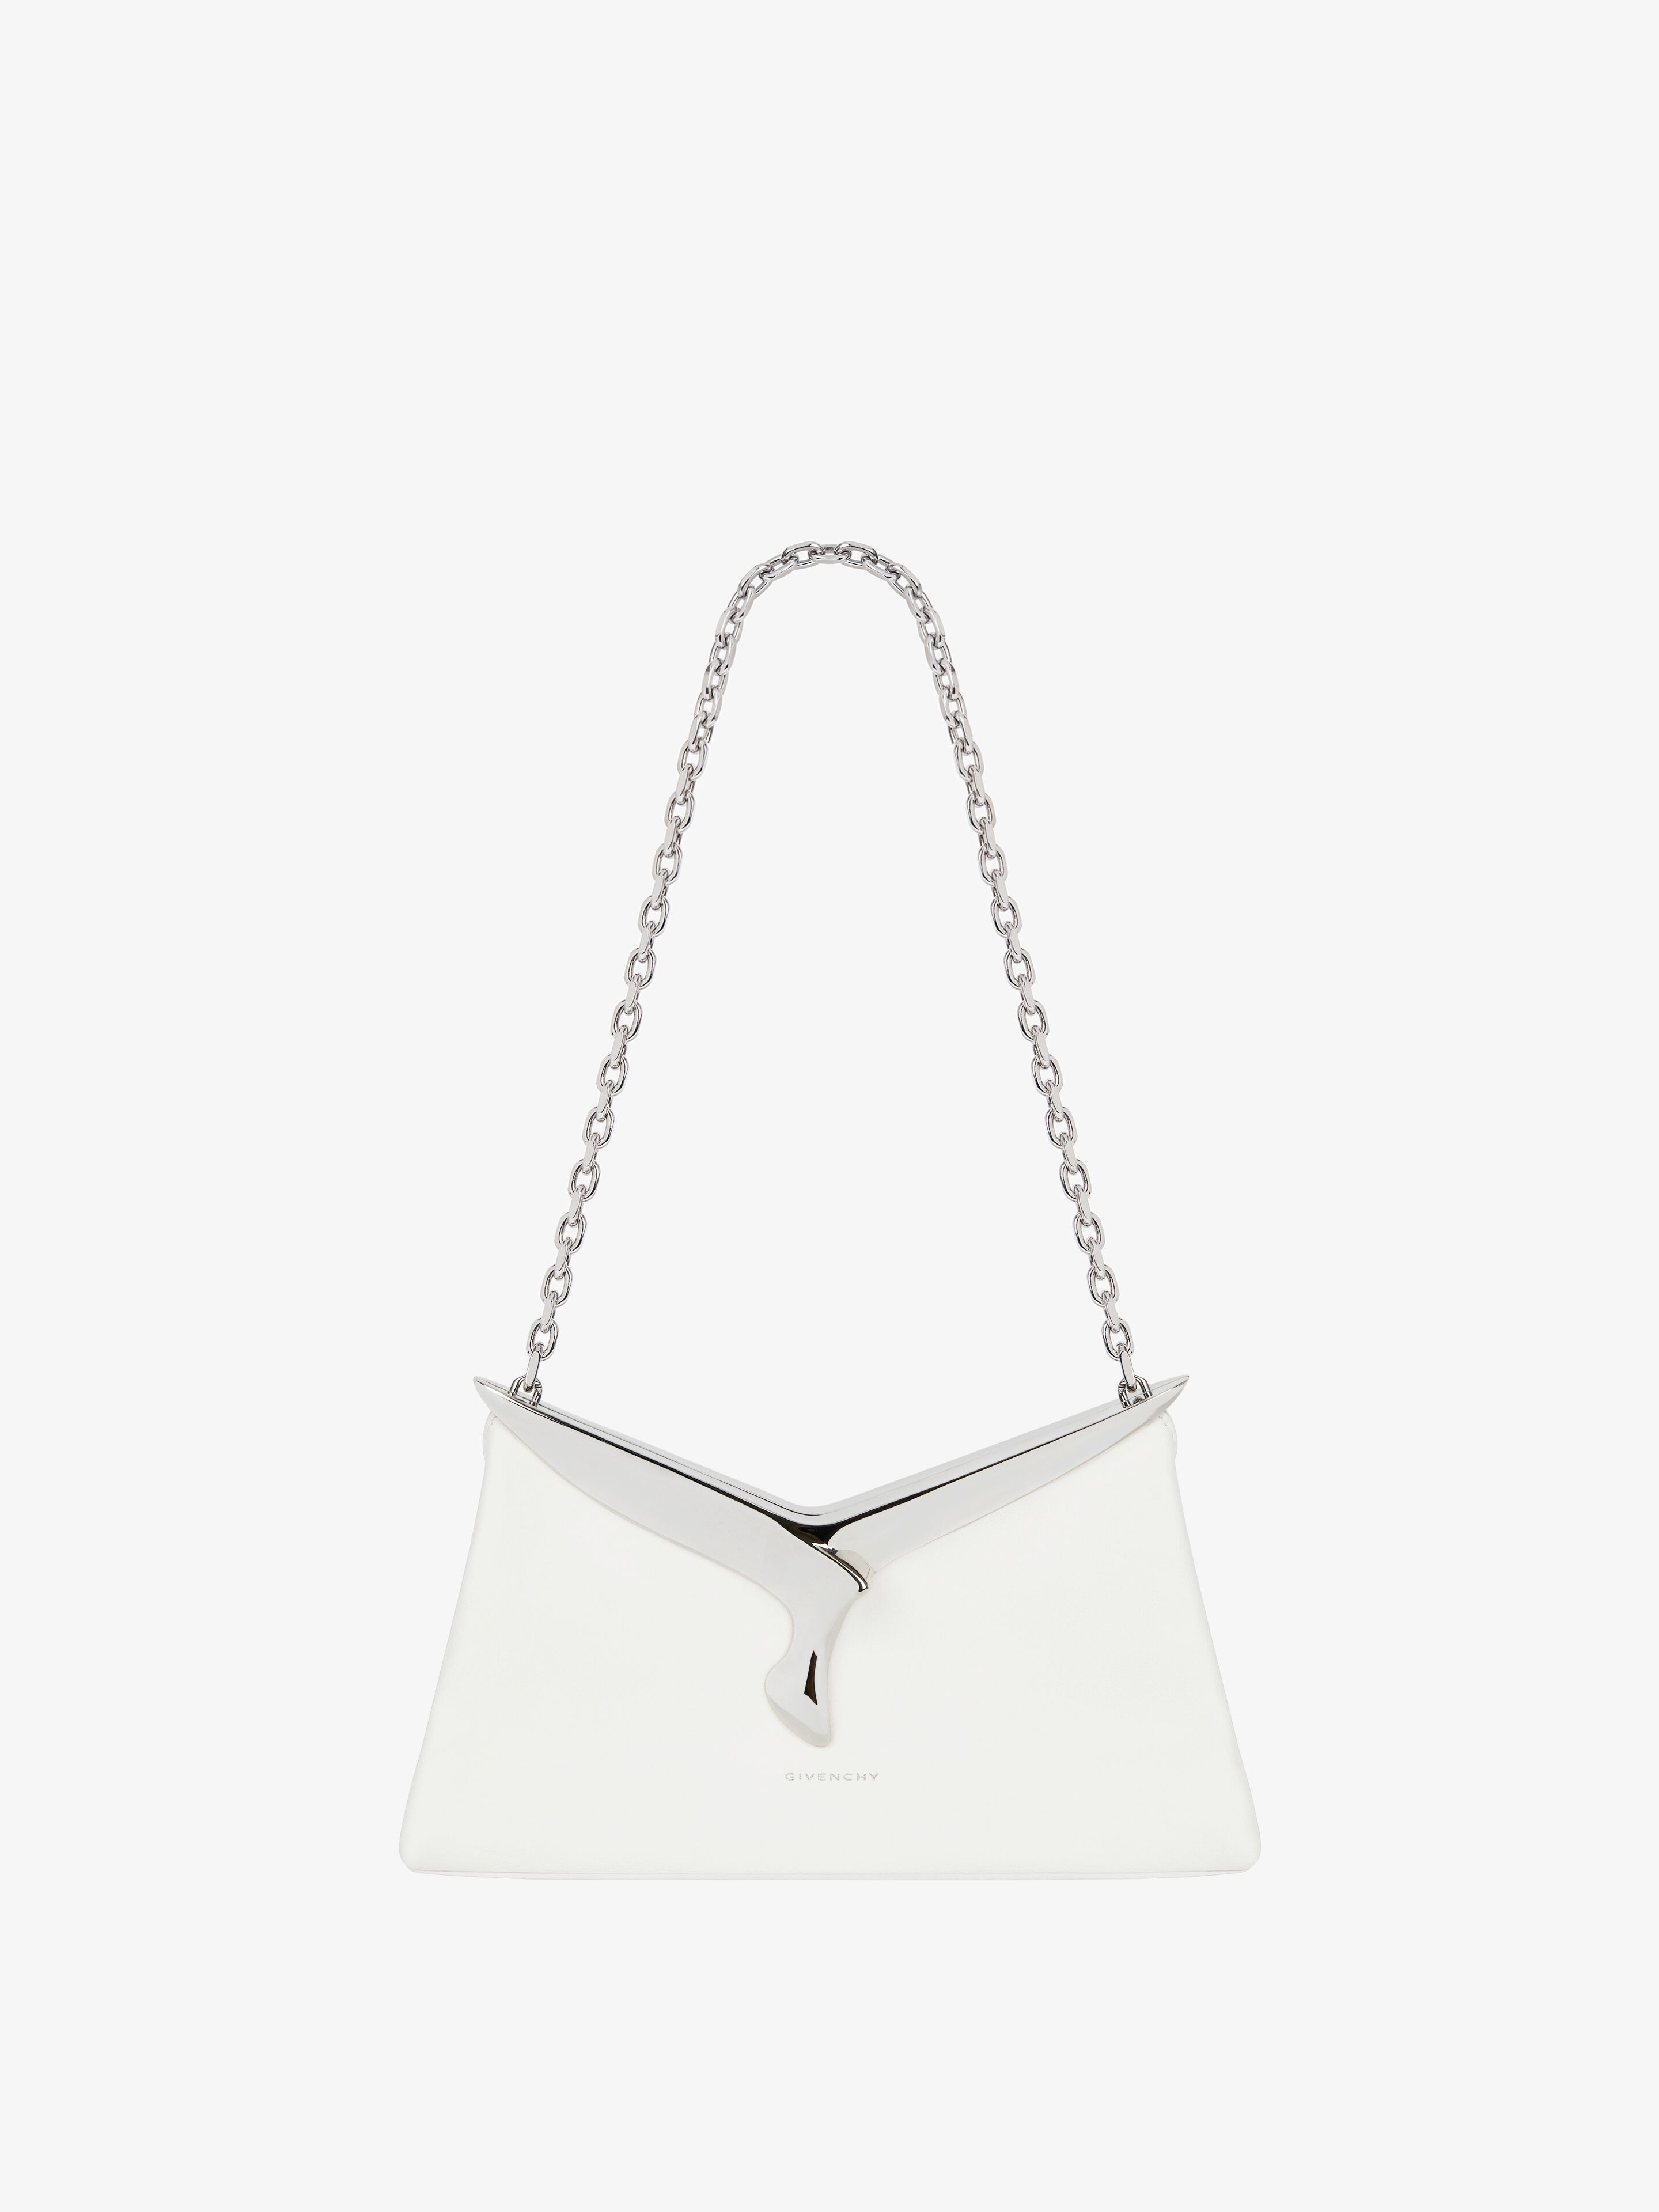 CUT OUT BIRD BAG IN NAPPA LEATHER - 1